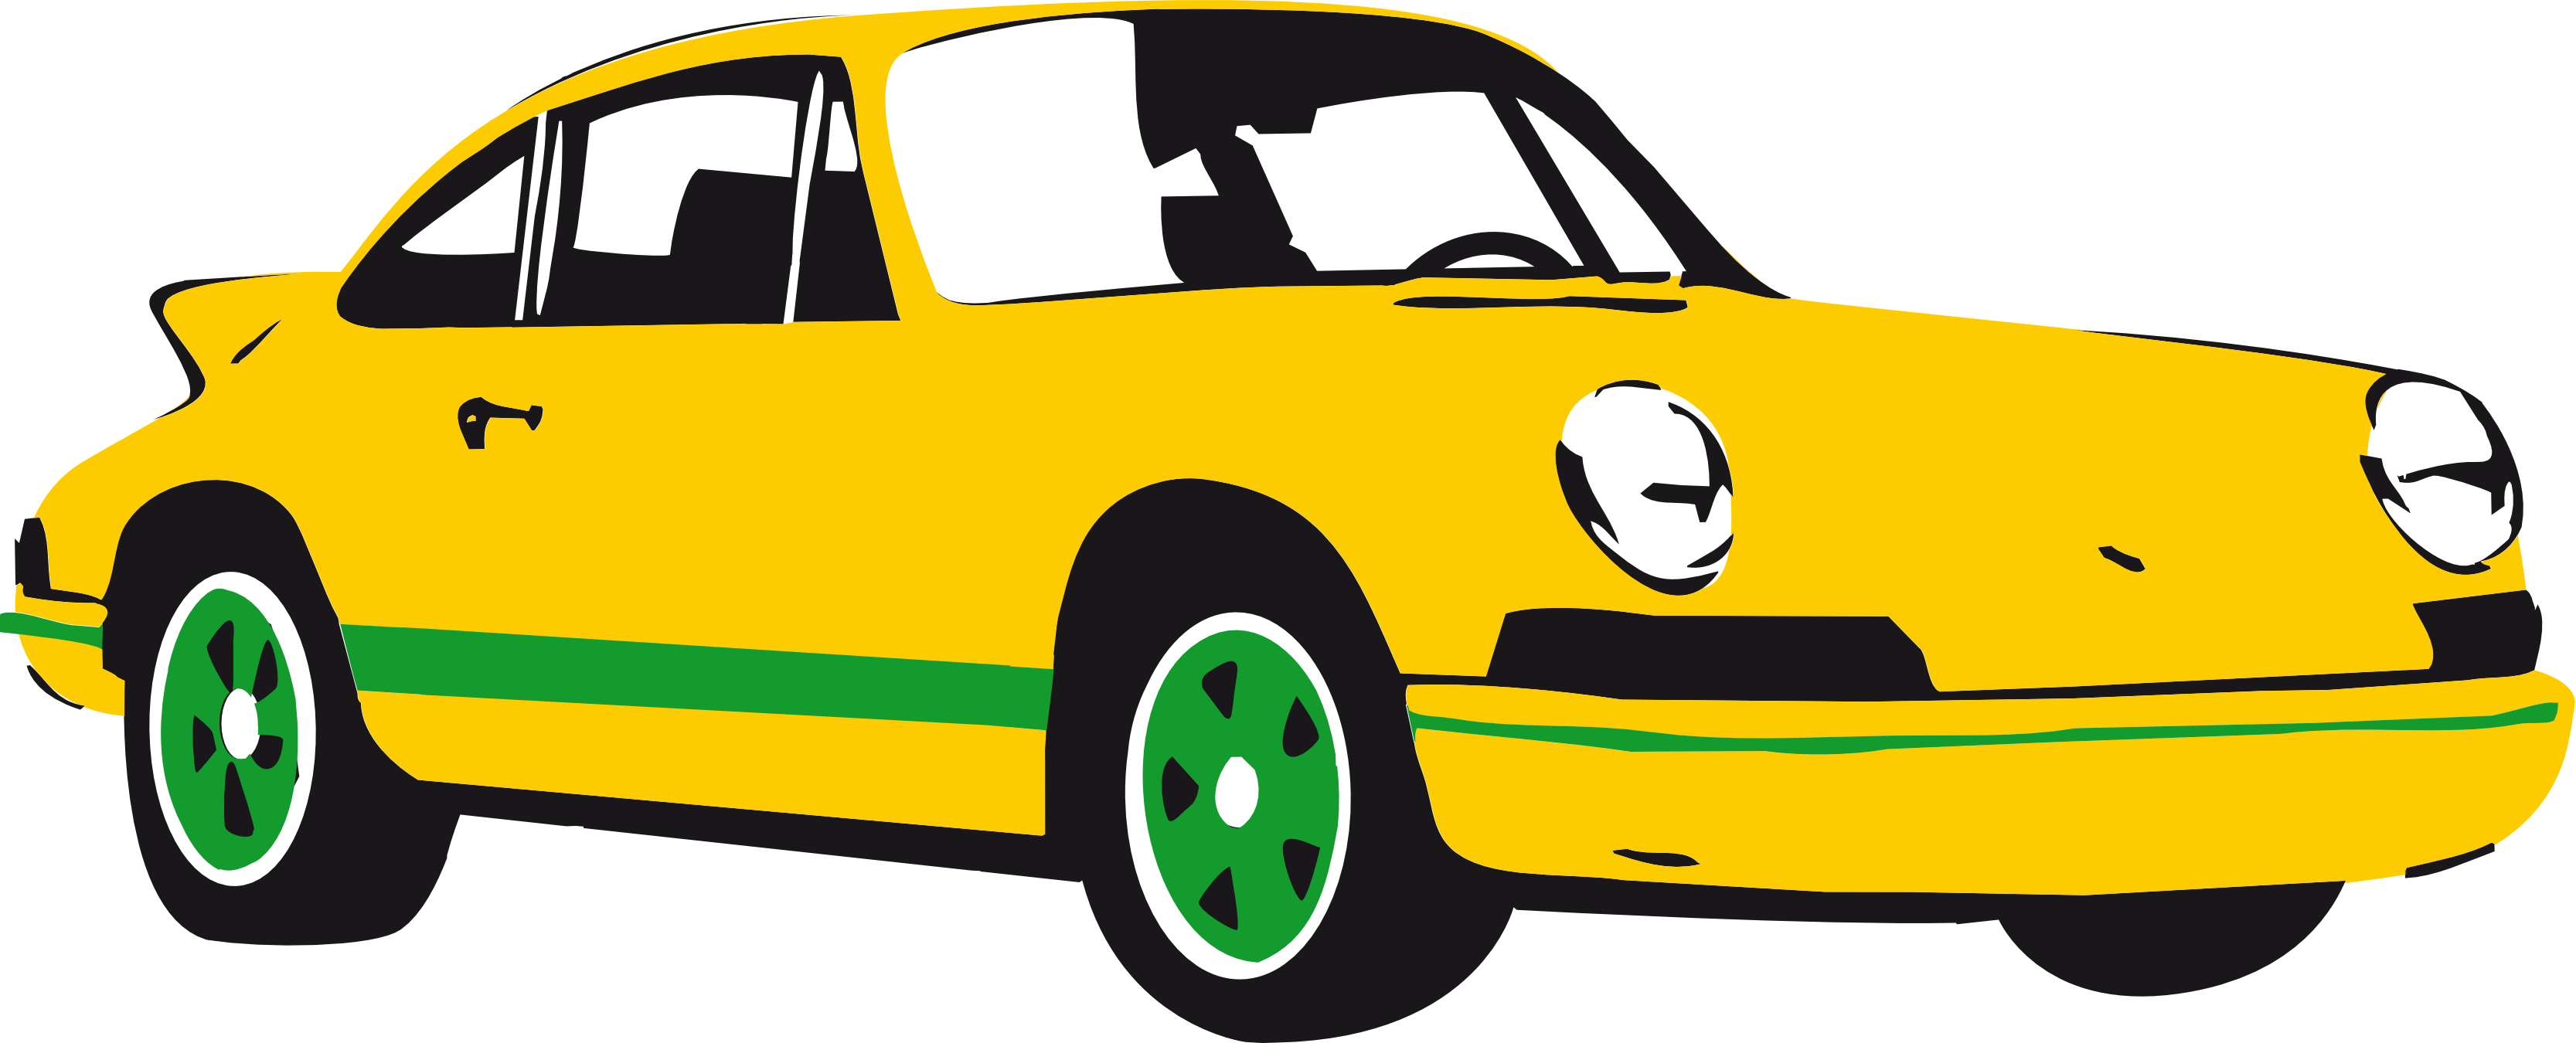 free clipart image of a car - photo #41